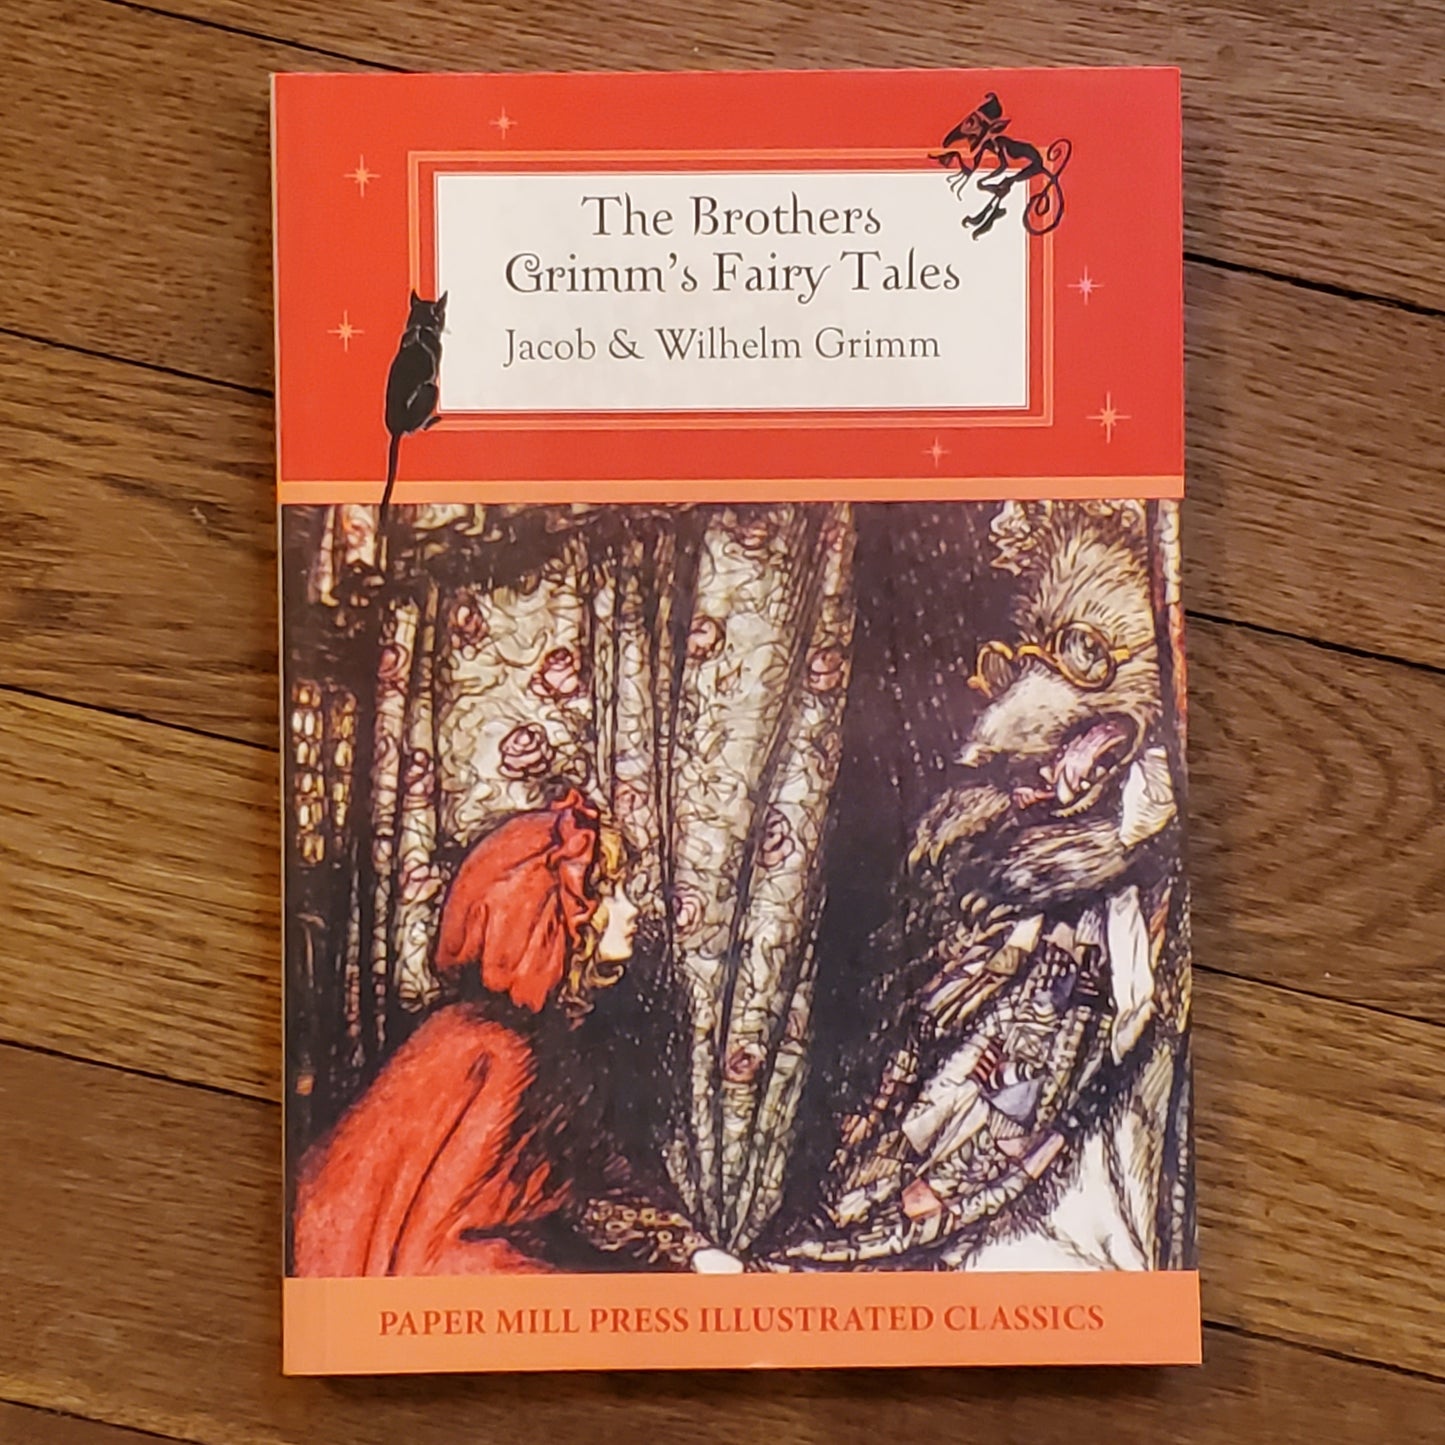 The Brothers Grimm's Fairy Tales